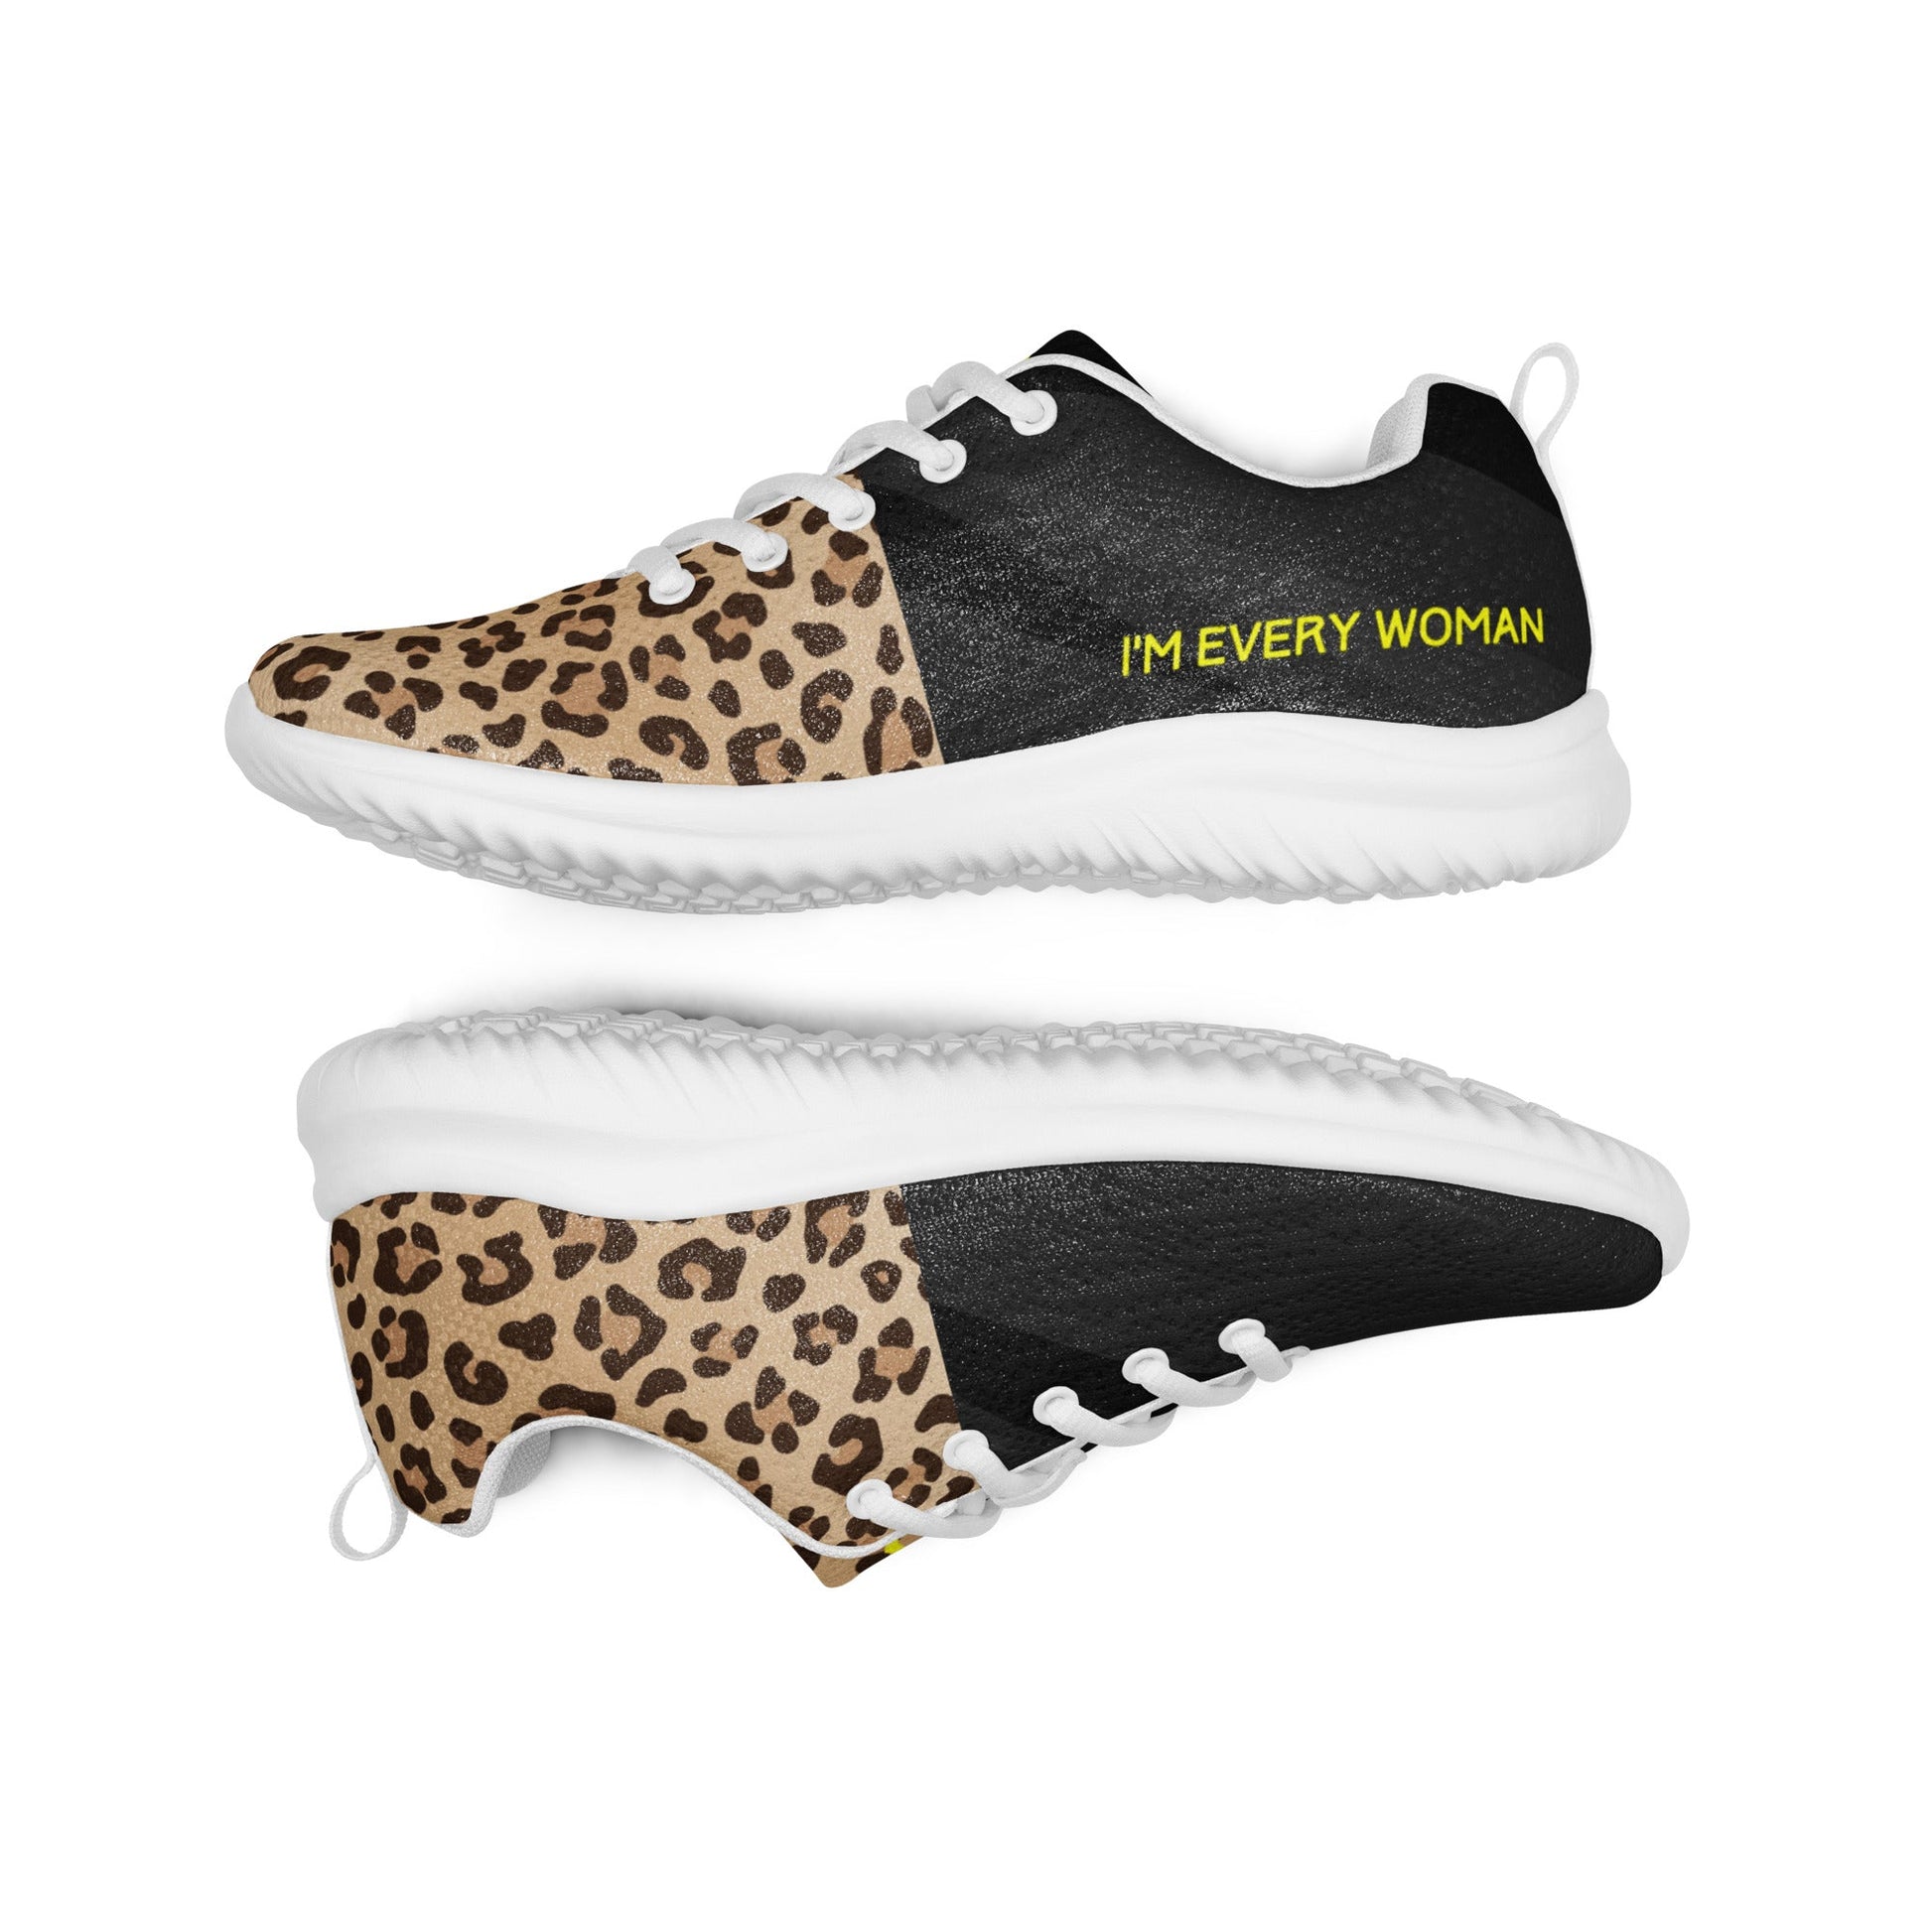 Chaussures Fitness - Femme- Collection Hommage - Léopard & Jaune - Le Traileur Anonyme